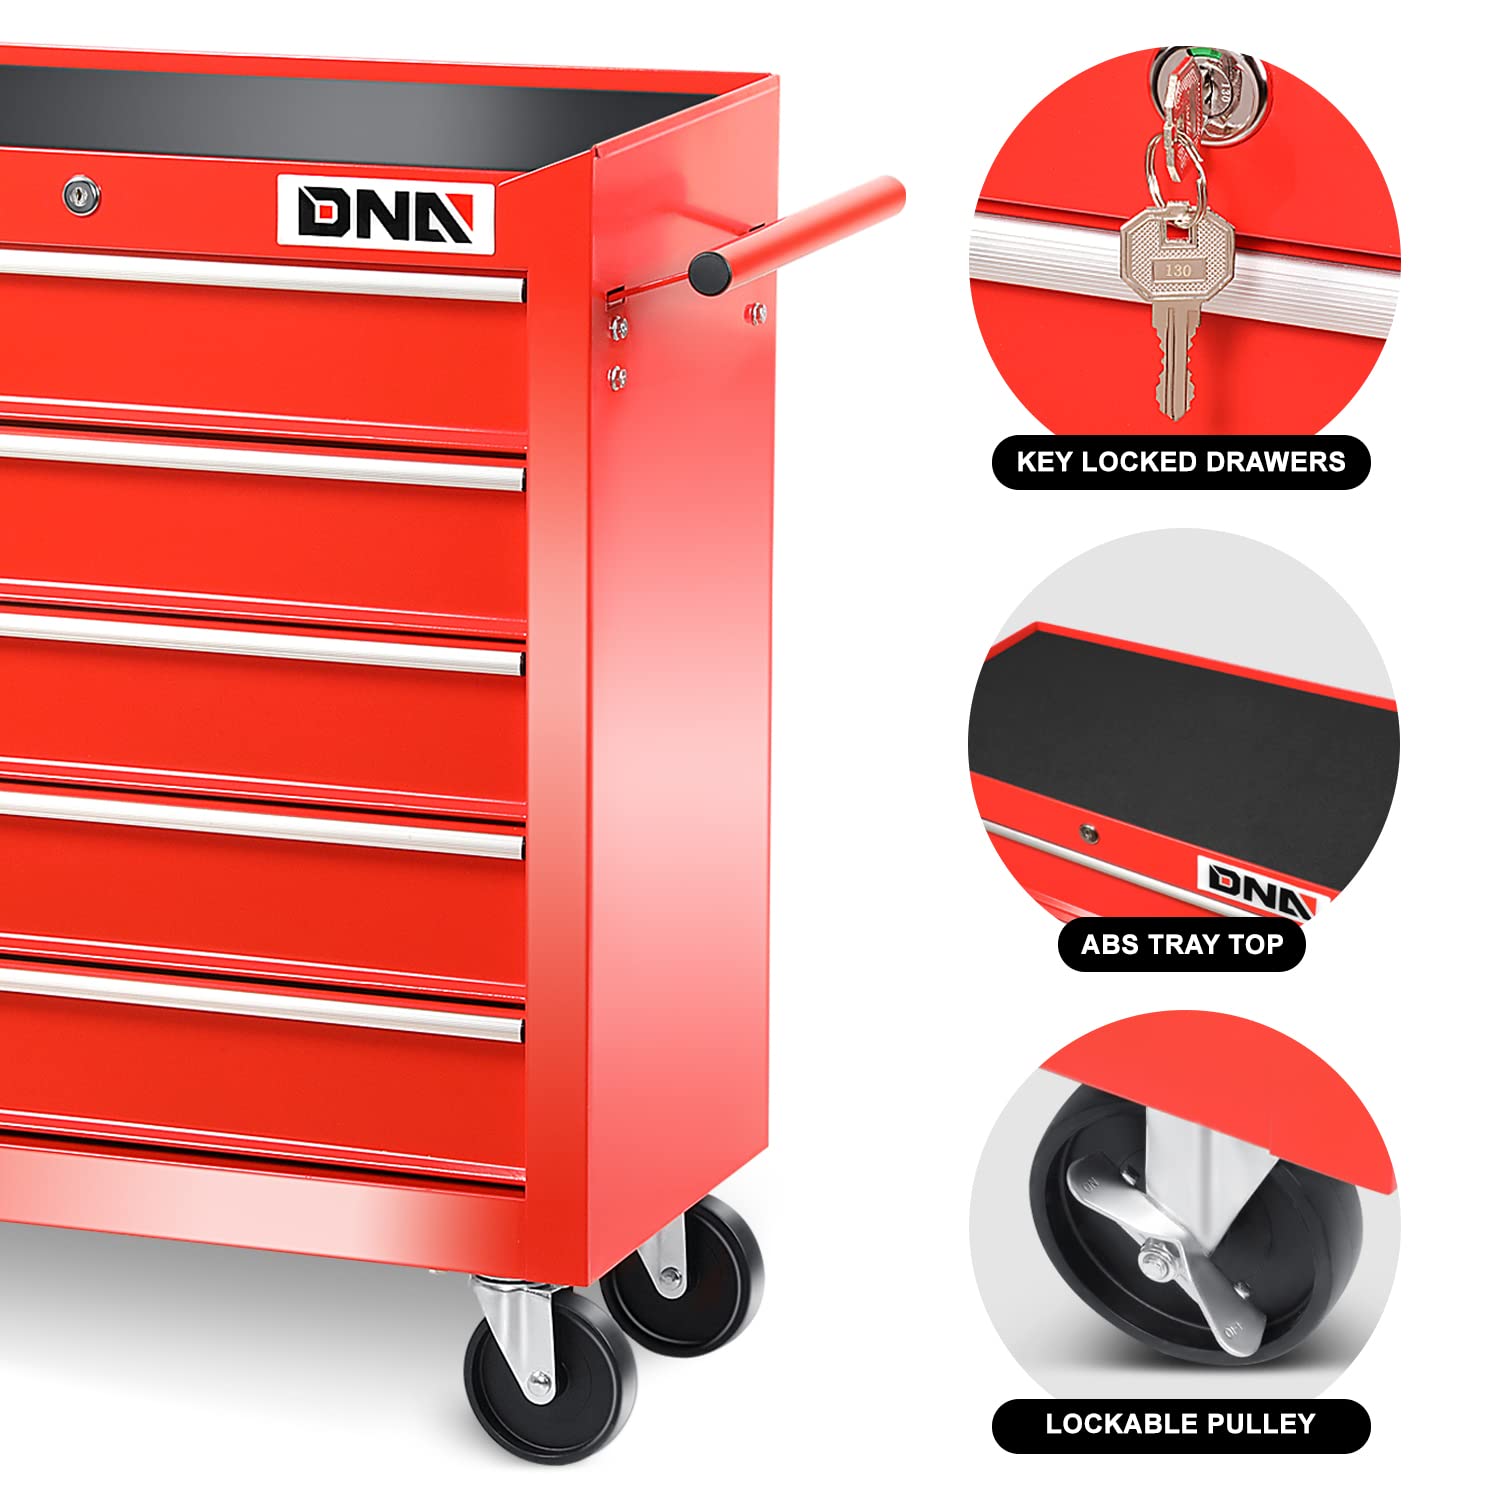 DNA MOTORING TOOLS-00263 5-Drawer Plastic Top Rolling Tool Cabinet with Keyed Locking System,13" D x 24.5" W x 30.5" H,Red